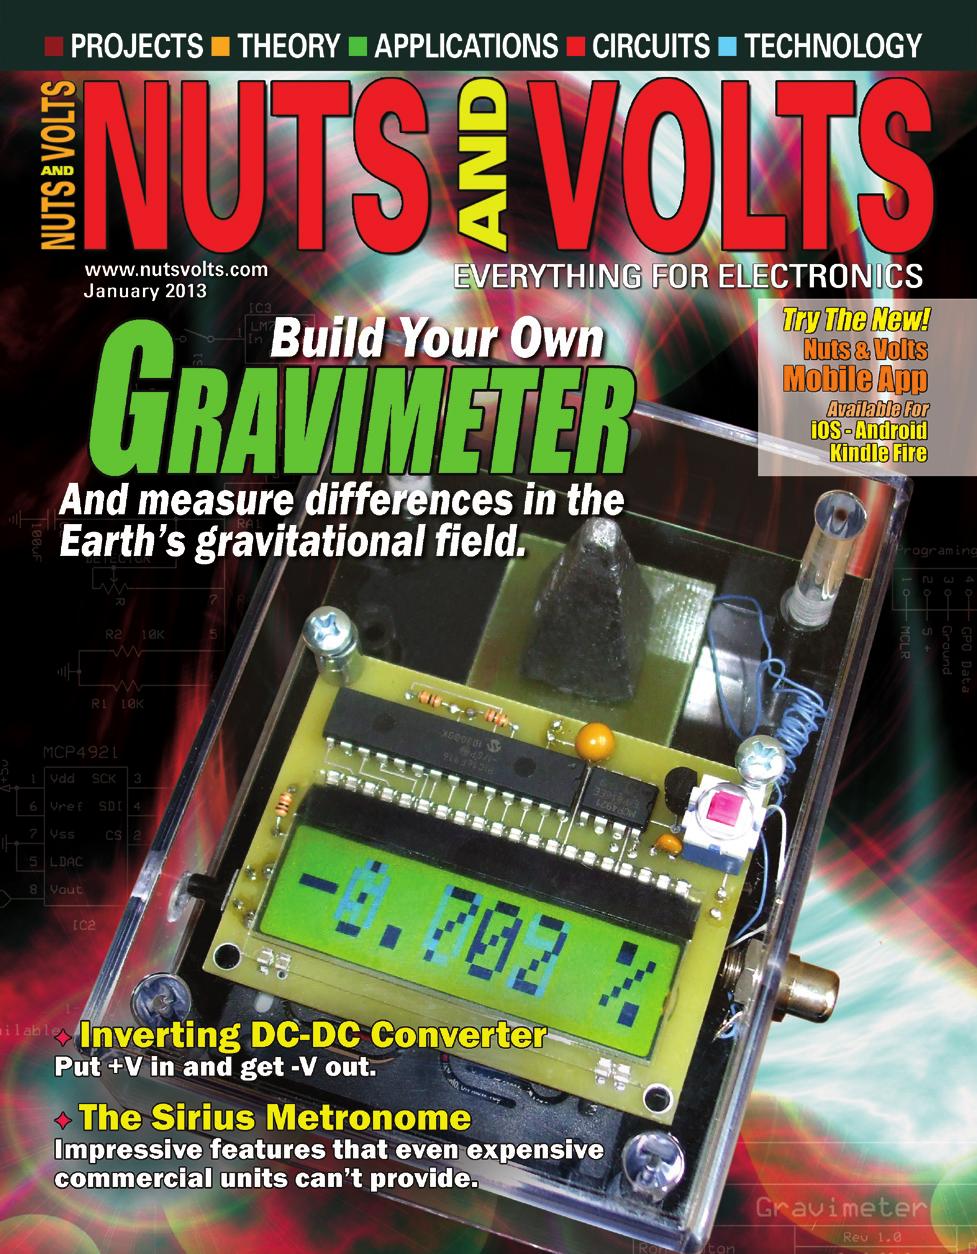 PROJECTS THEORY APPS CIRCUITS TECHNOLOGY VOLUME 35 2014 READERSHIP DETAILS Readership is approximately 60,000 monthly.